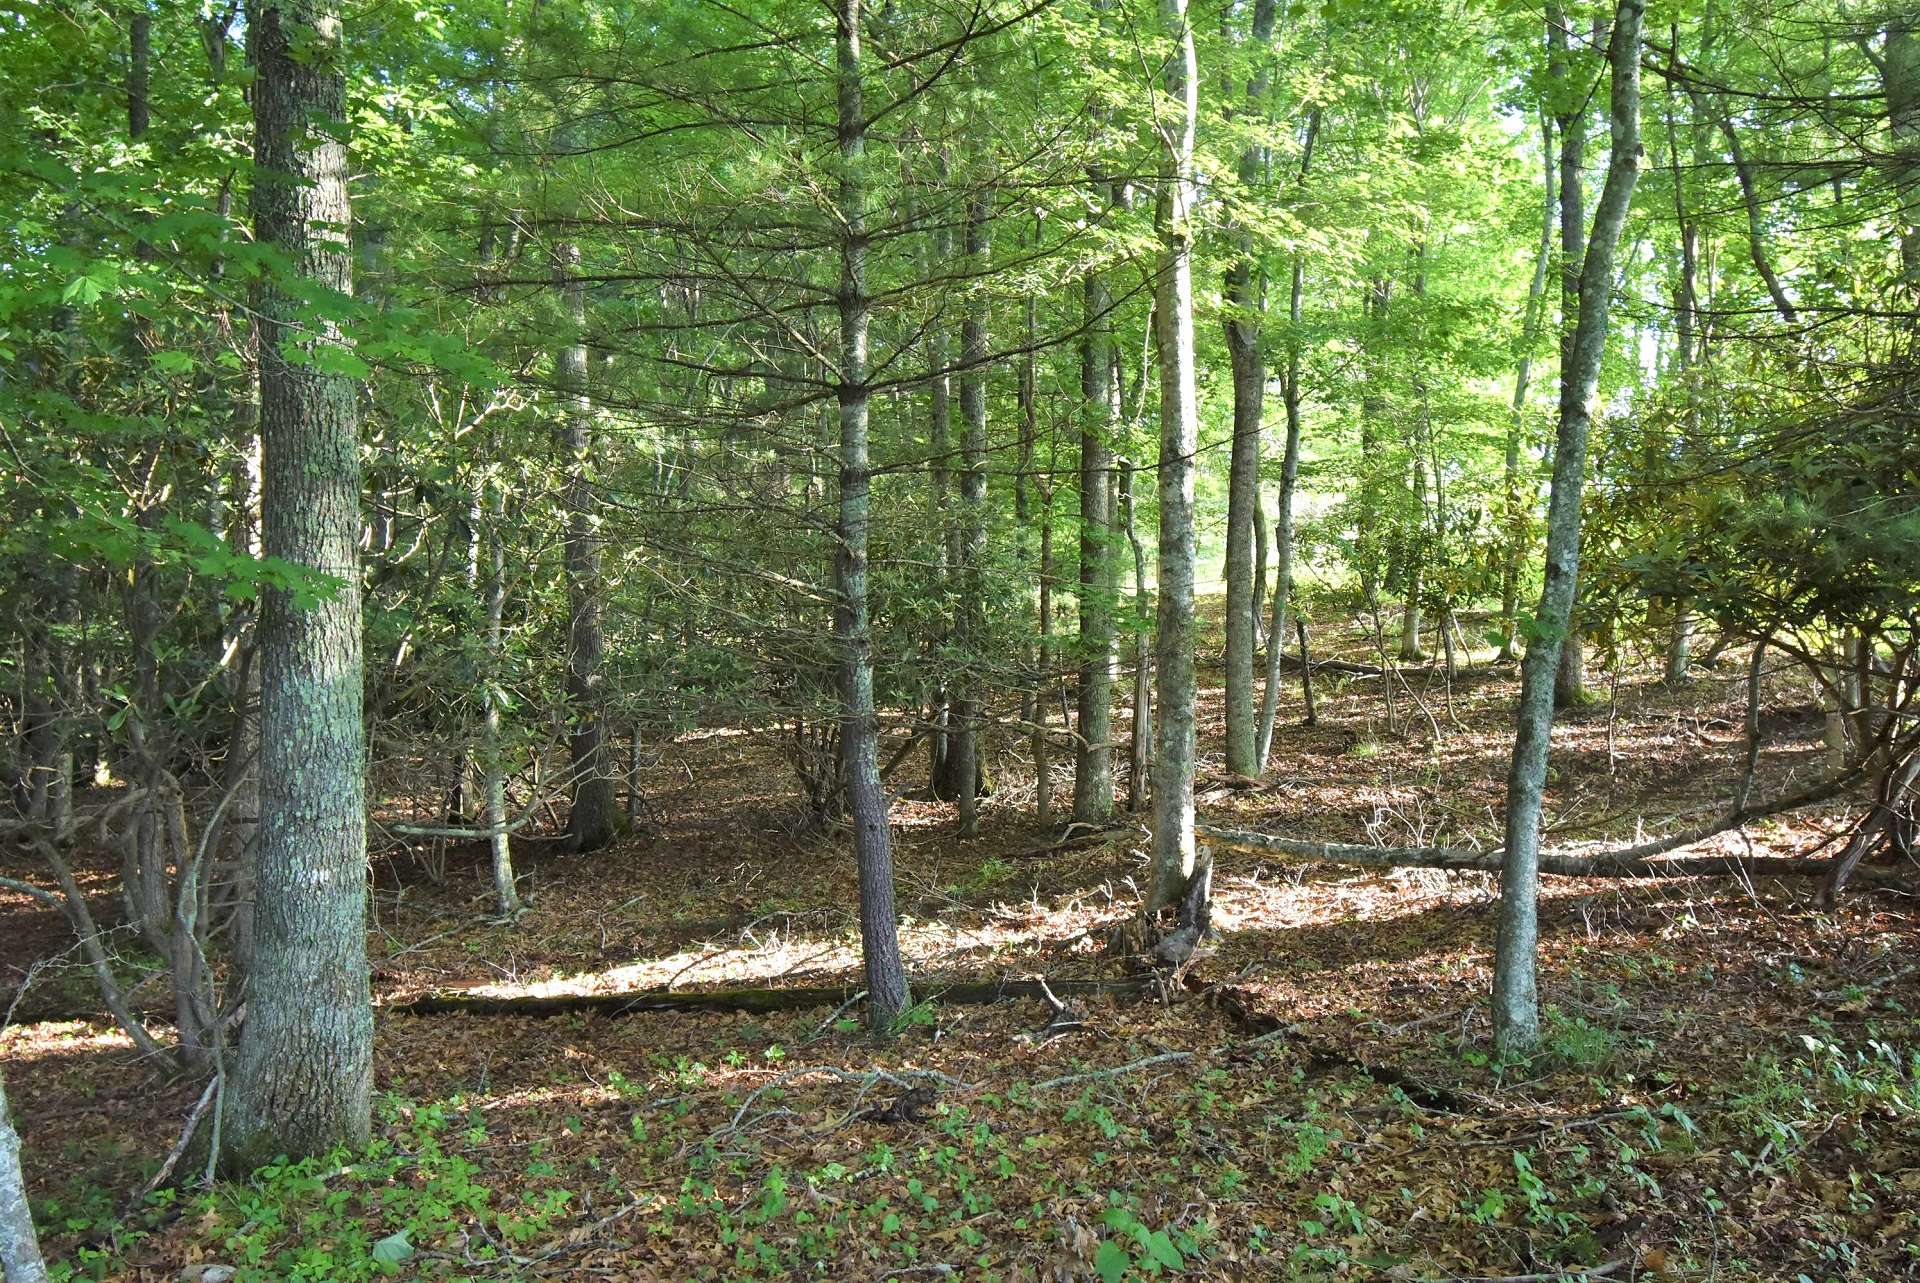 The mostly wooded terrain offers a splendid habitat for a diverse mixture of wildlife that includes, whitetail deer, turkeys, and the occasional black bear.